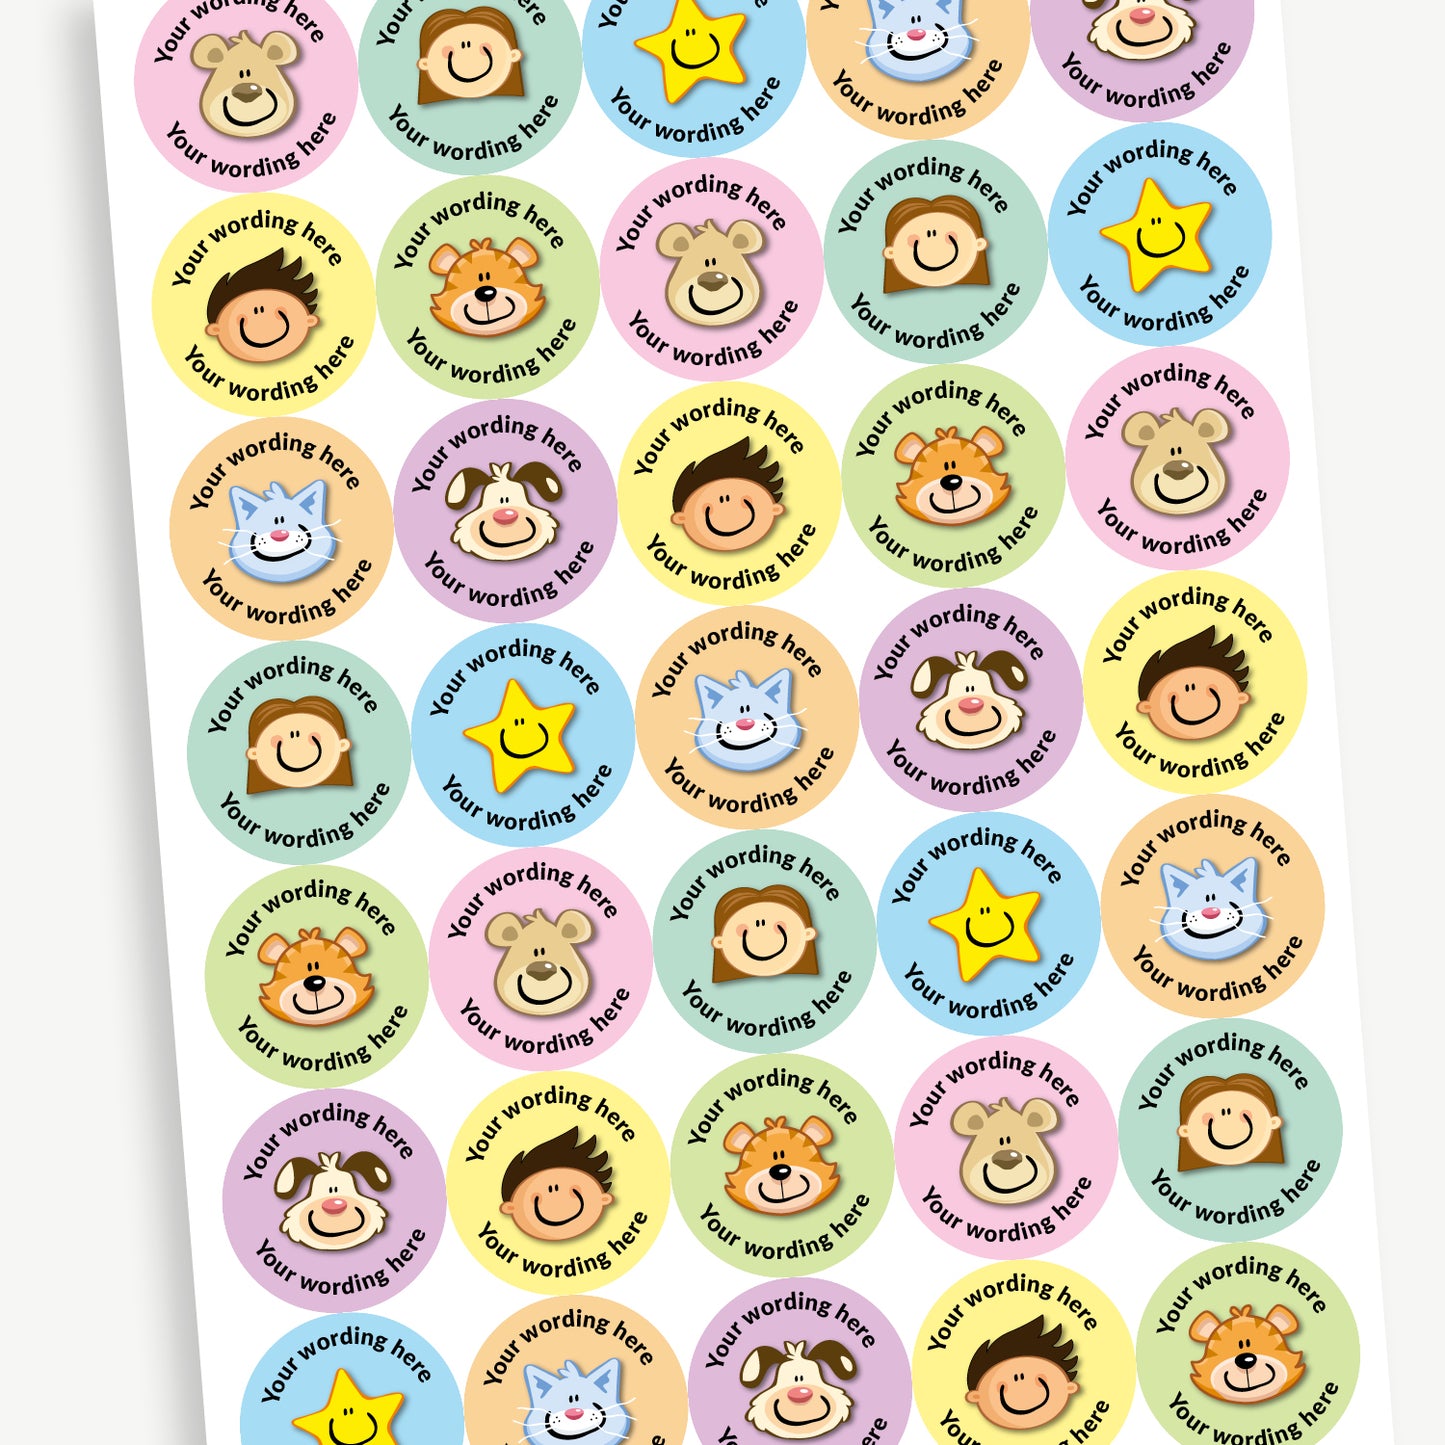 Personalised Sweet Shop Scented Smiley Face Stickers - 37mm